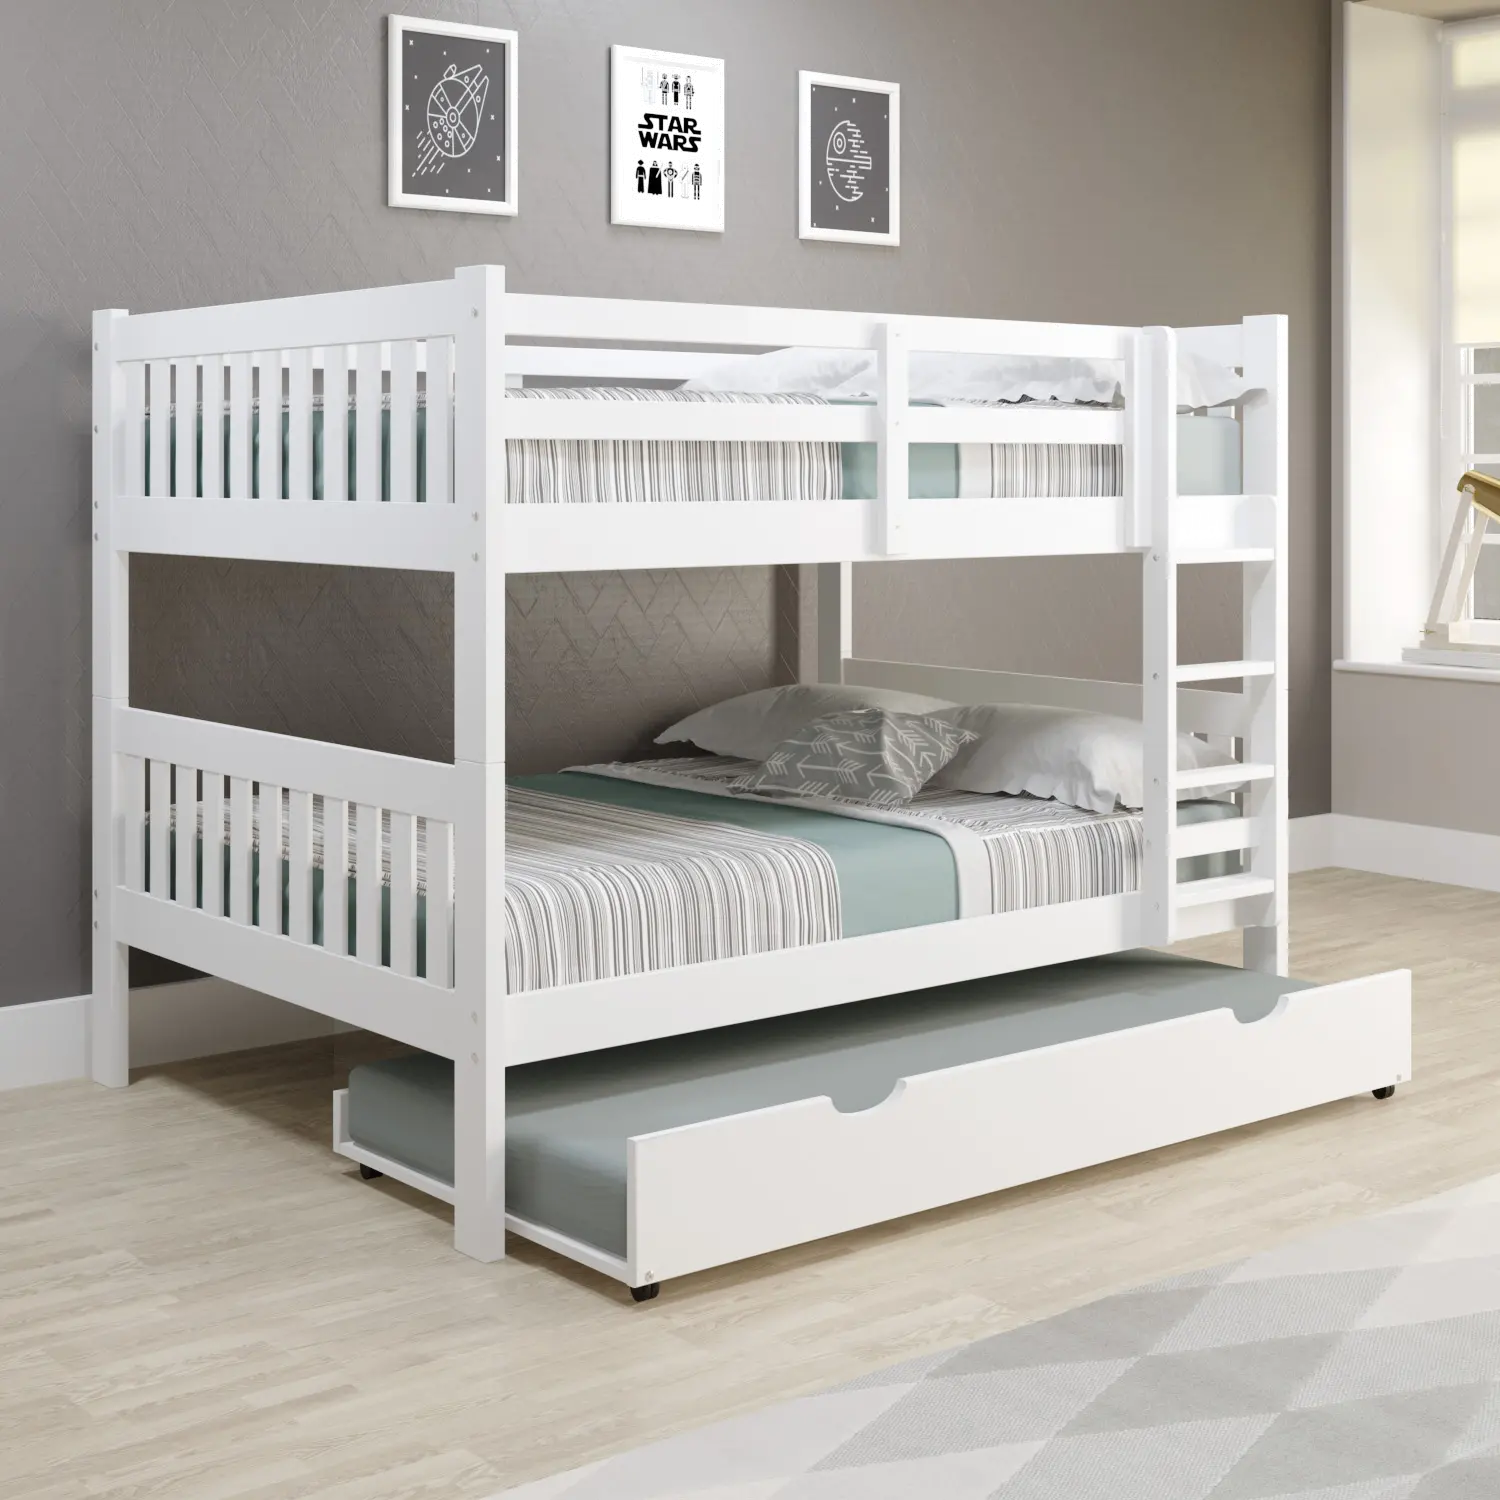 1015-3FFW503-W Mission White Full-over-Full Bunk Bed with Trundle sku 1015-3FFW503-W